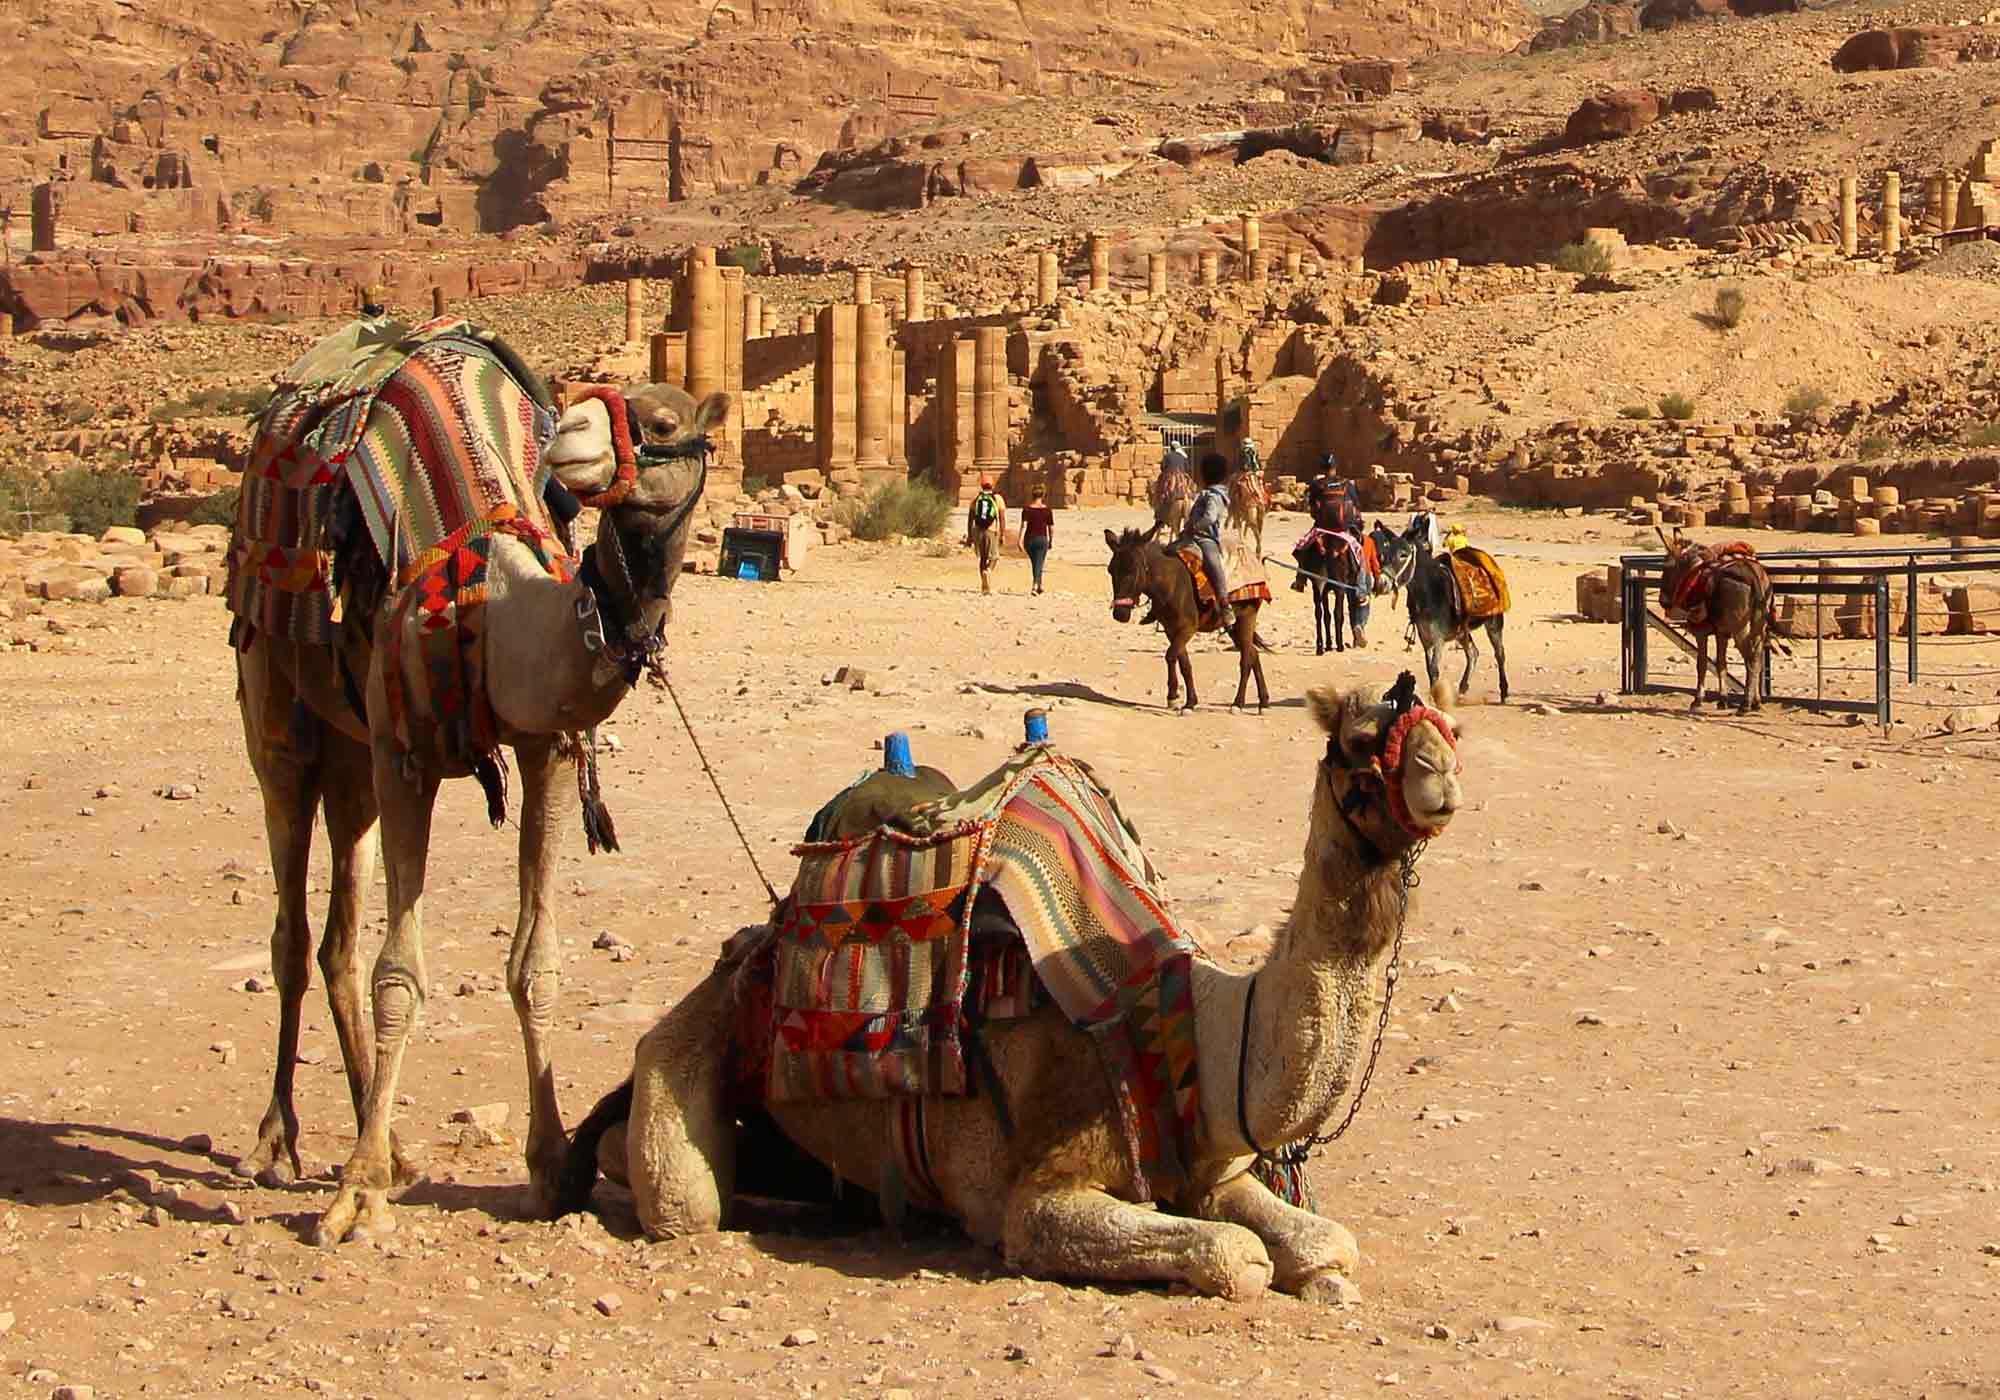 Camels and donkeys ready to offer rides to the different areas of Petra, Jordan